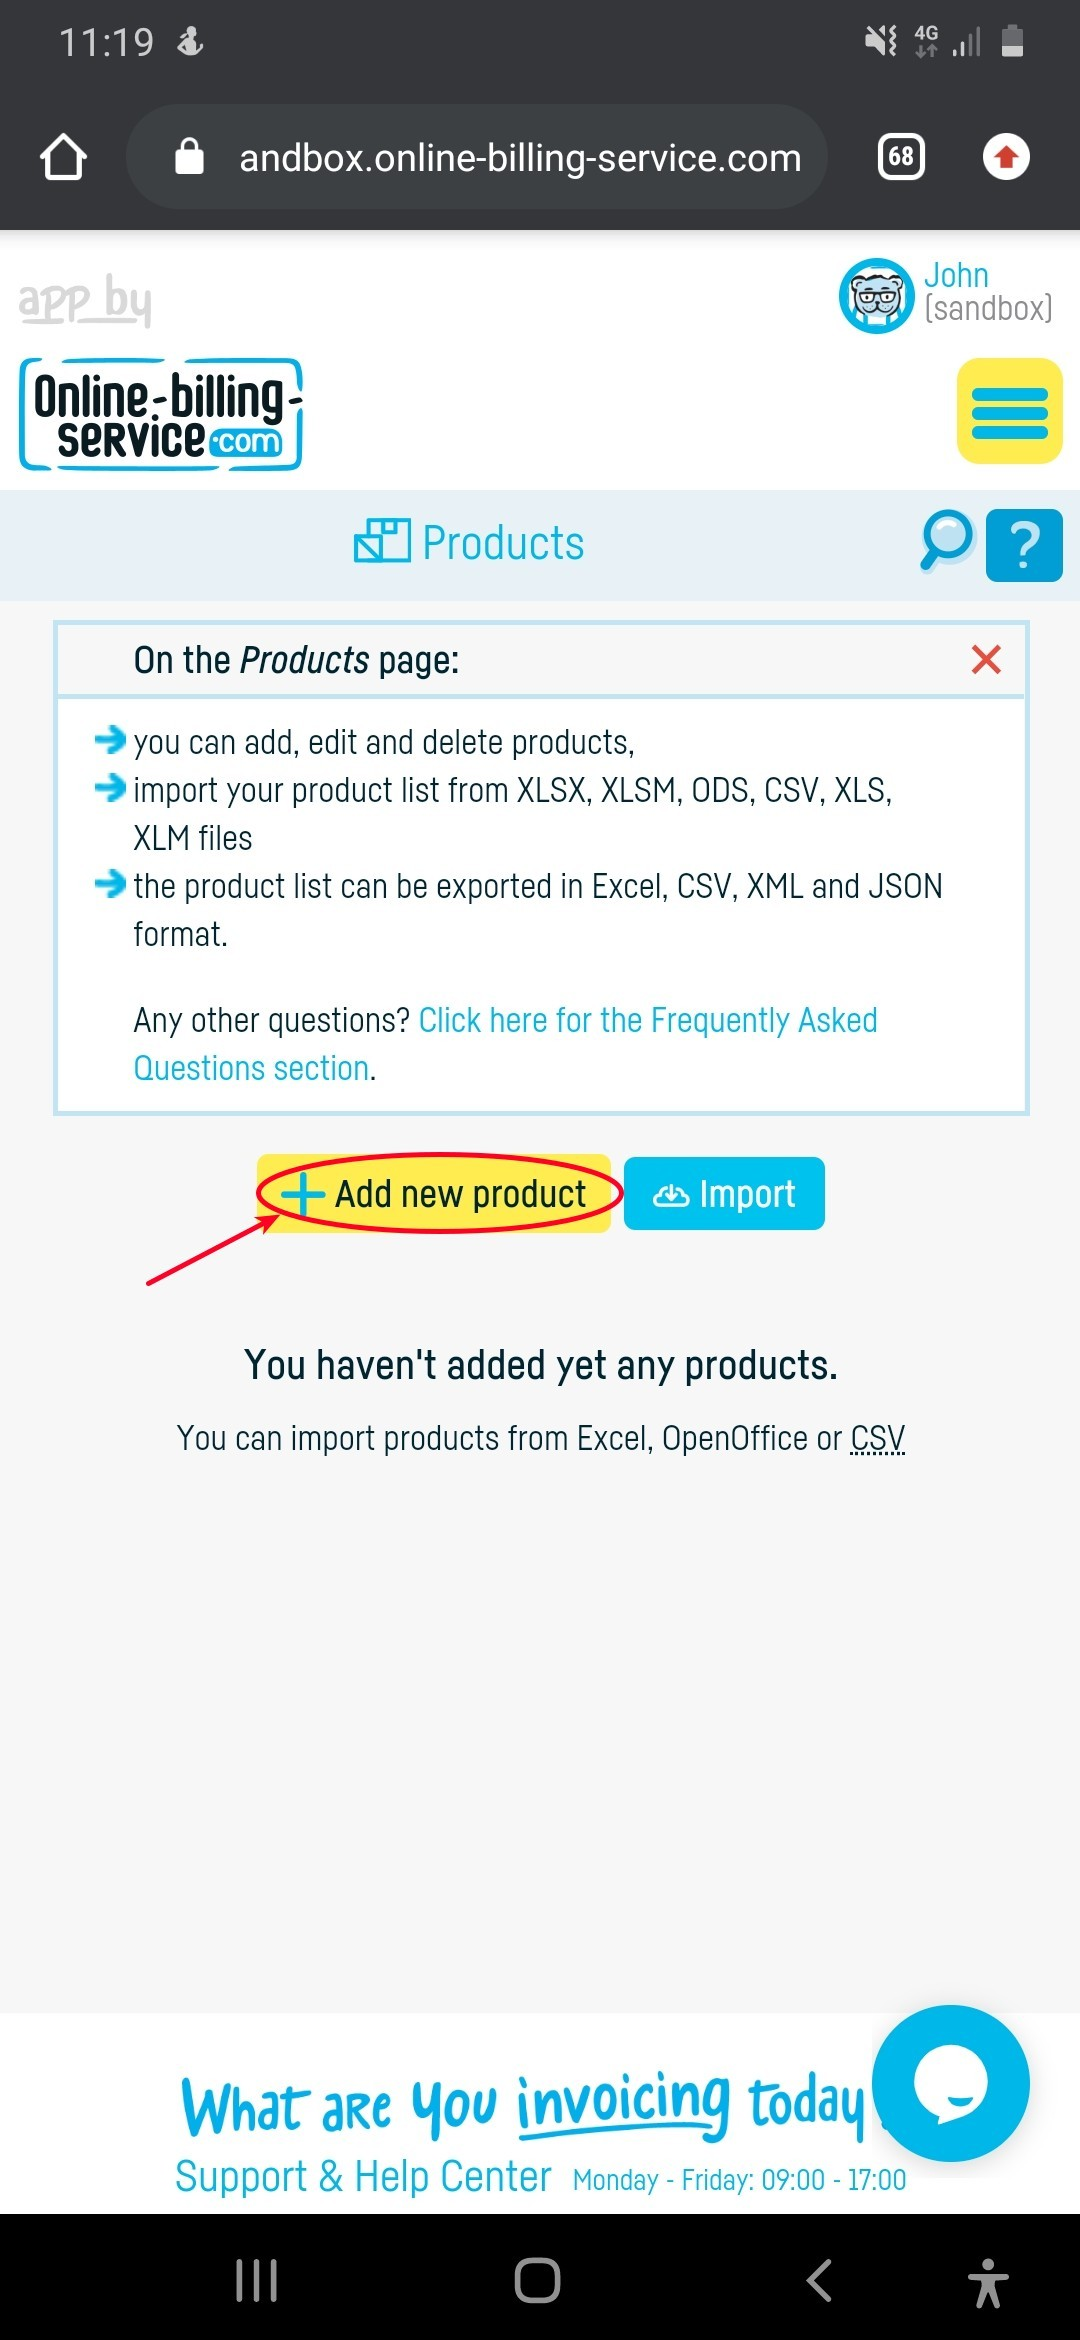 How do I add a new product / service? - step 2